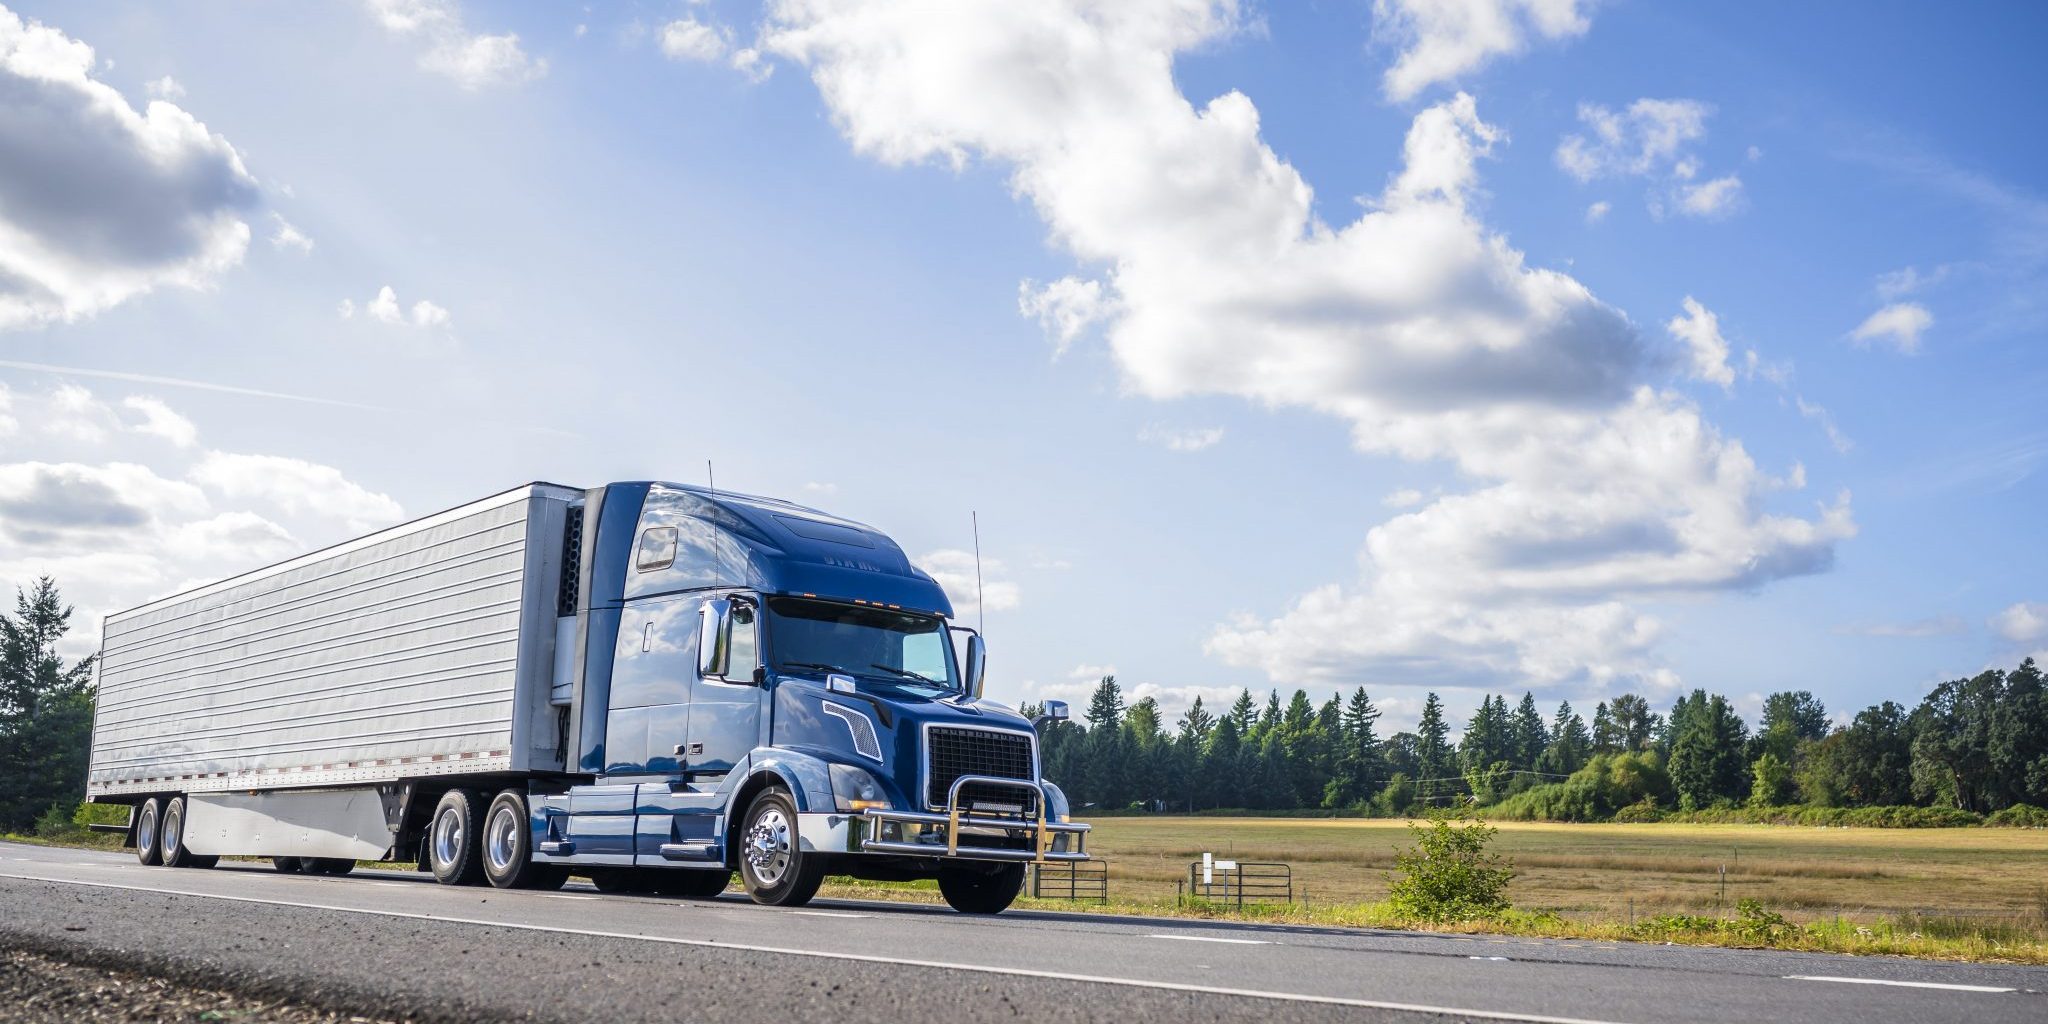 Why You Should Plan a Truck Load Benefit for Your Company